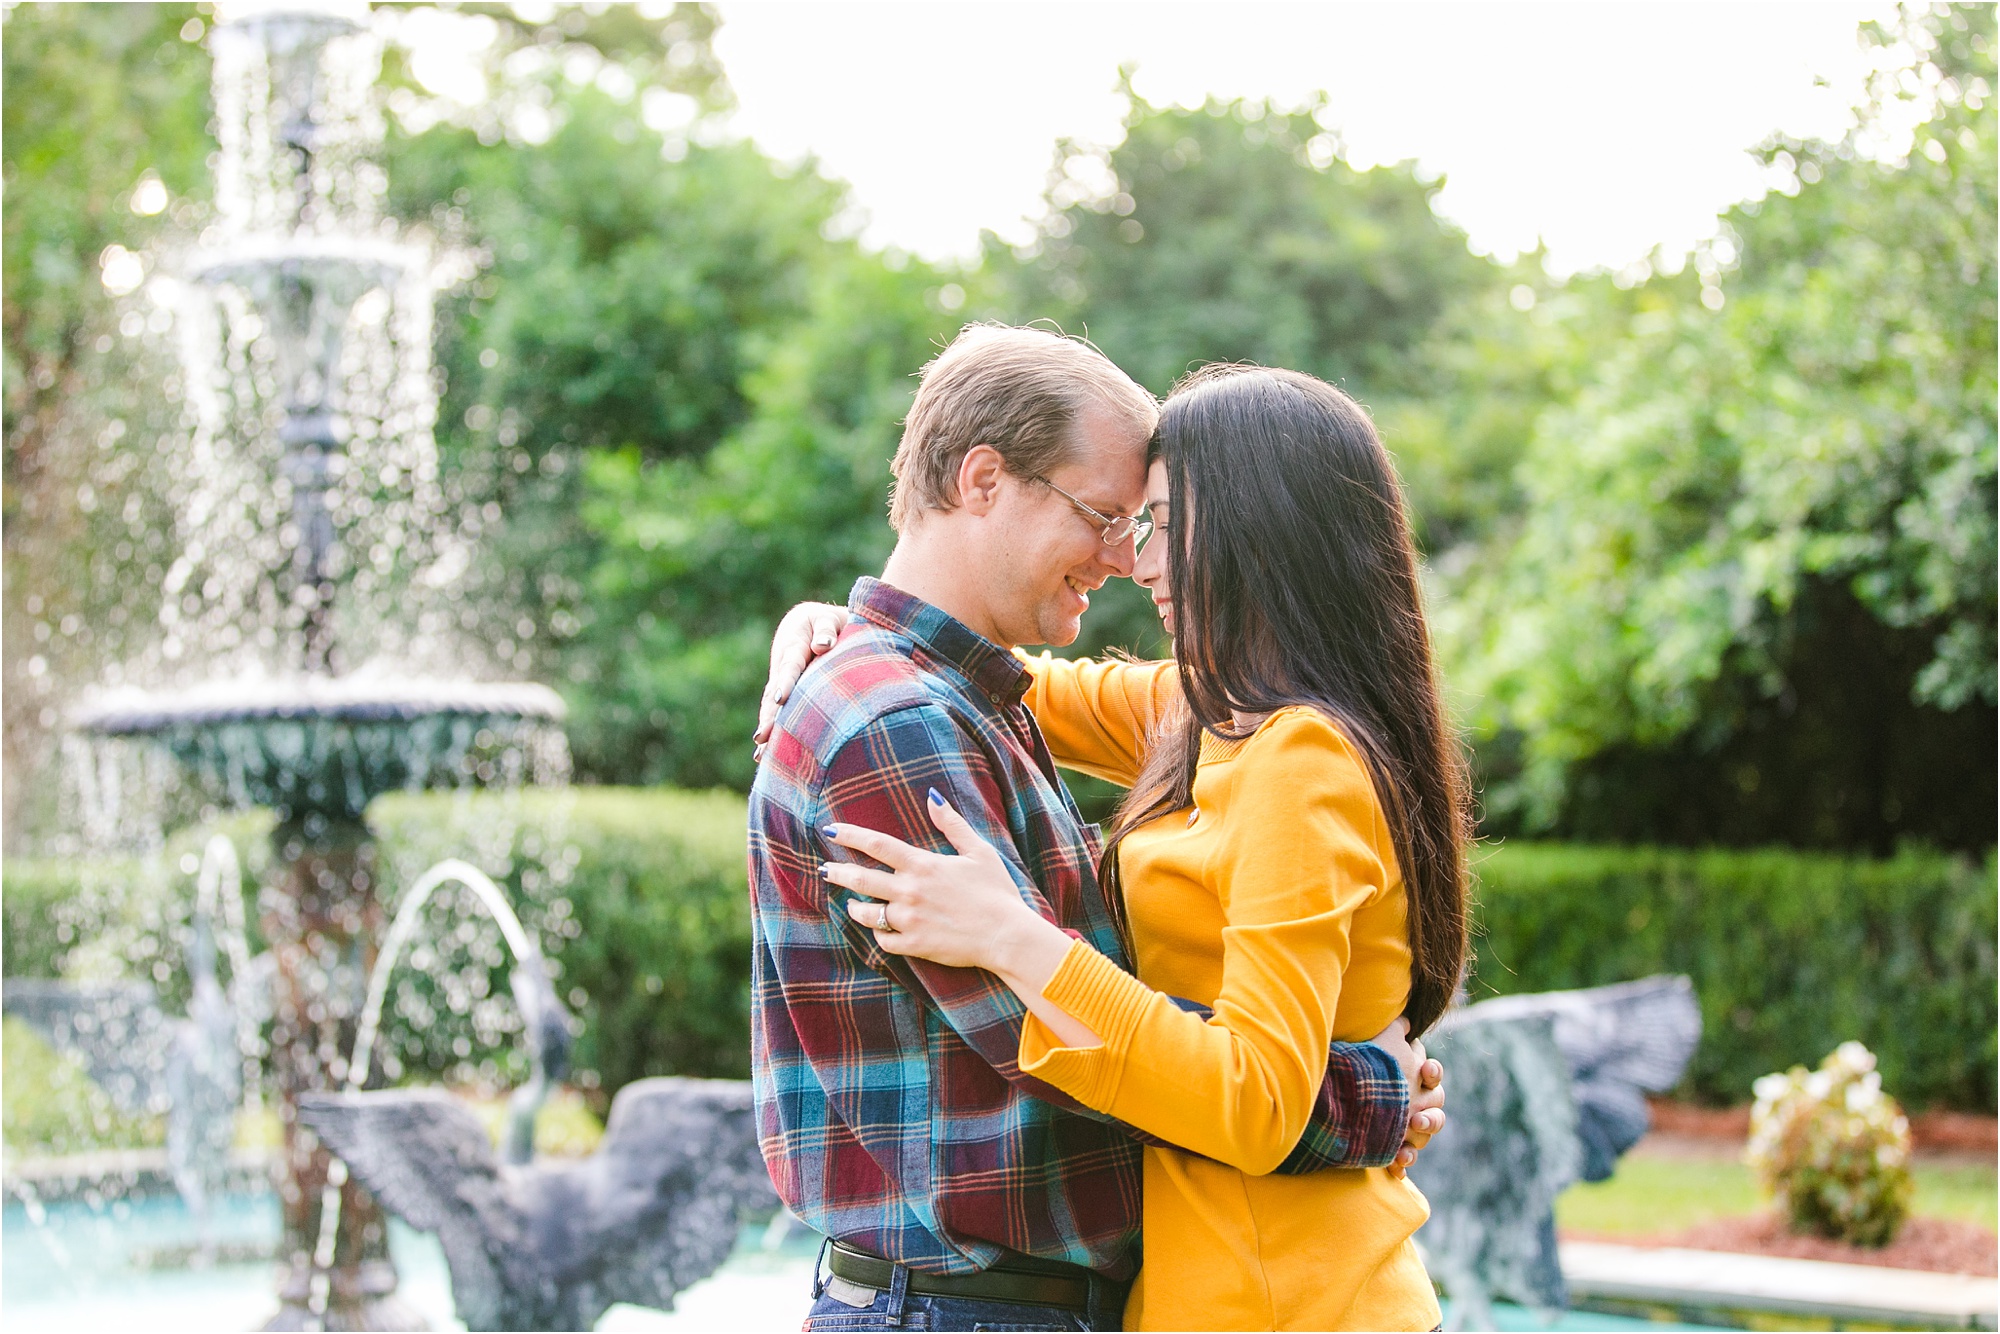 macon wedding photographer engagement photos the retreat southern bridle farms perry georgia mustard sweater plaid shirt